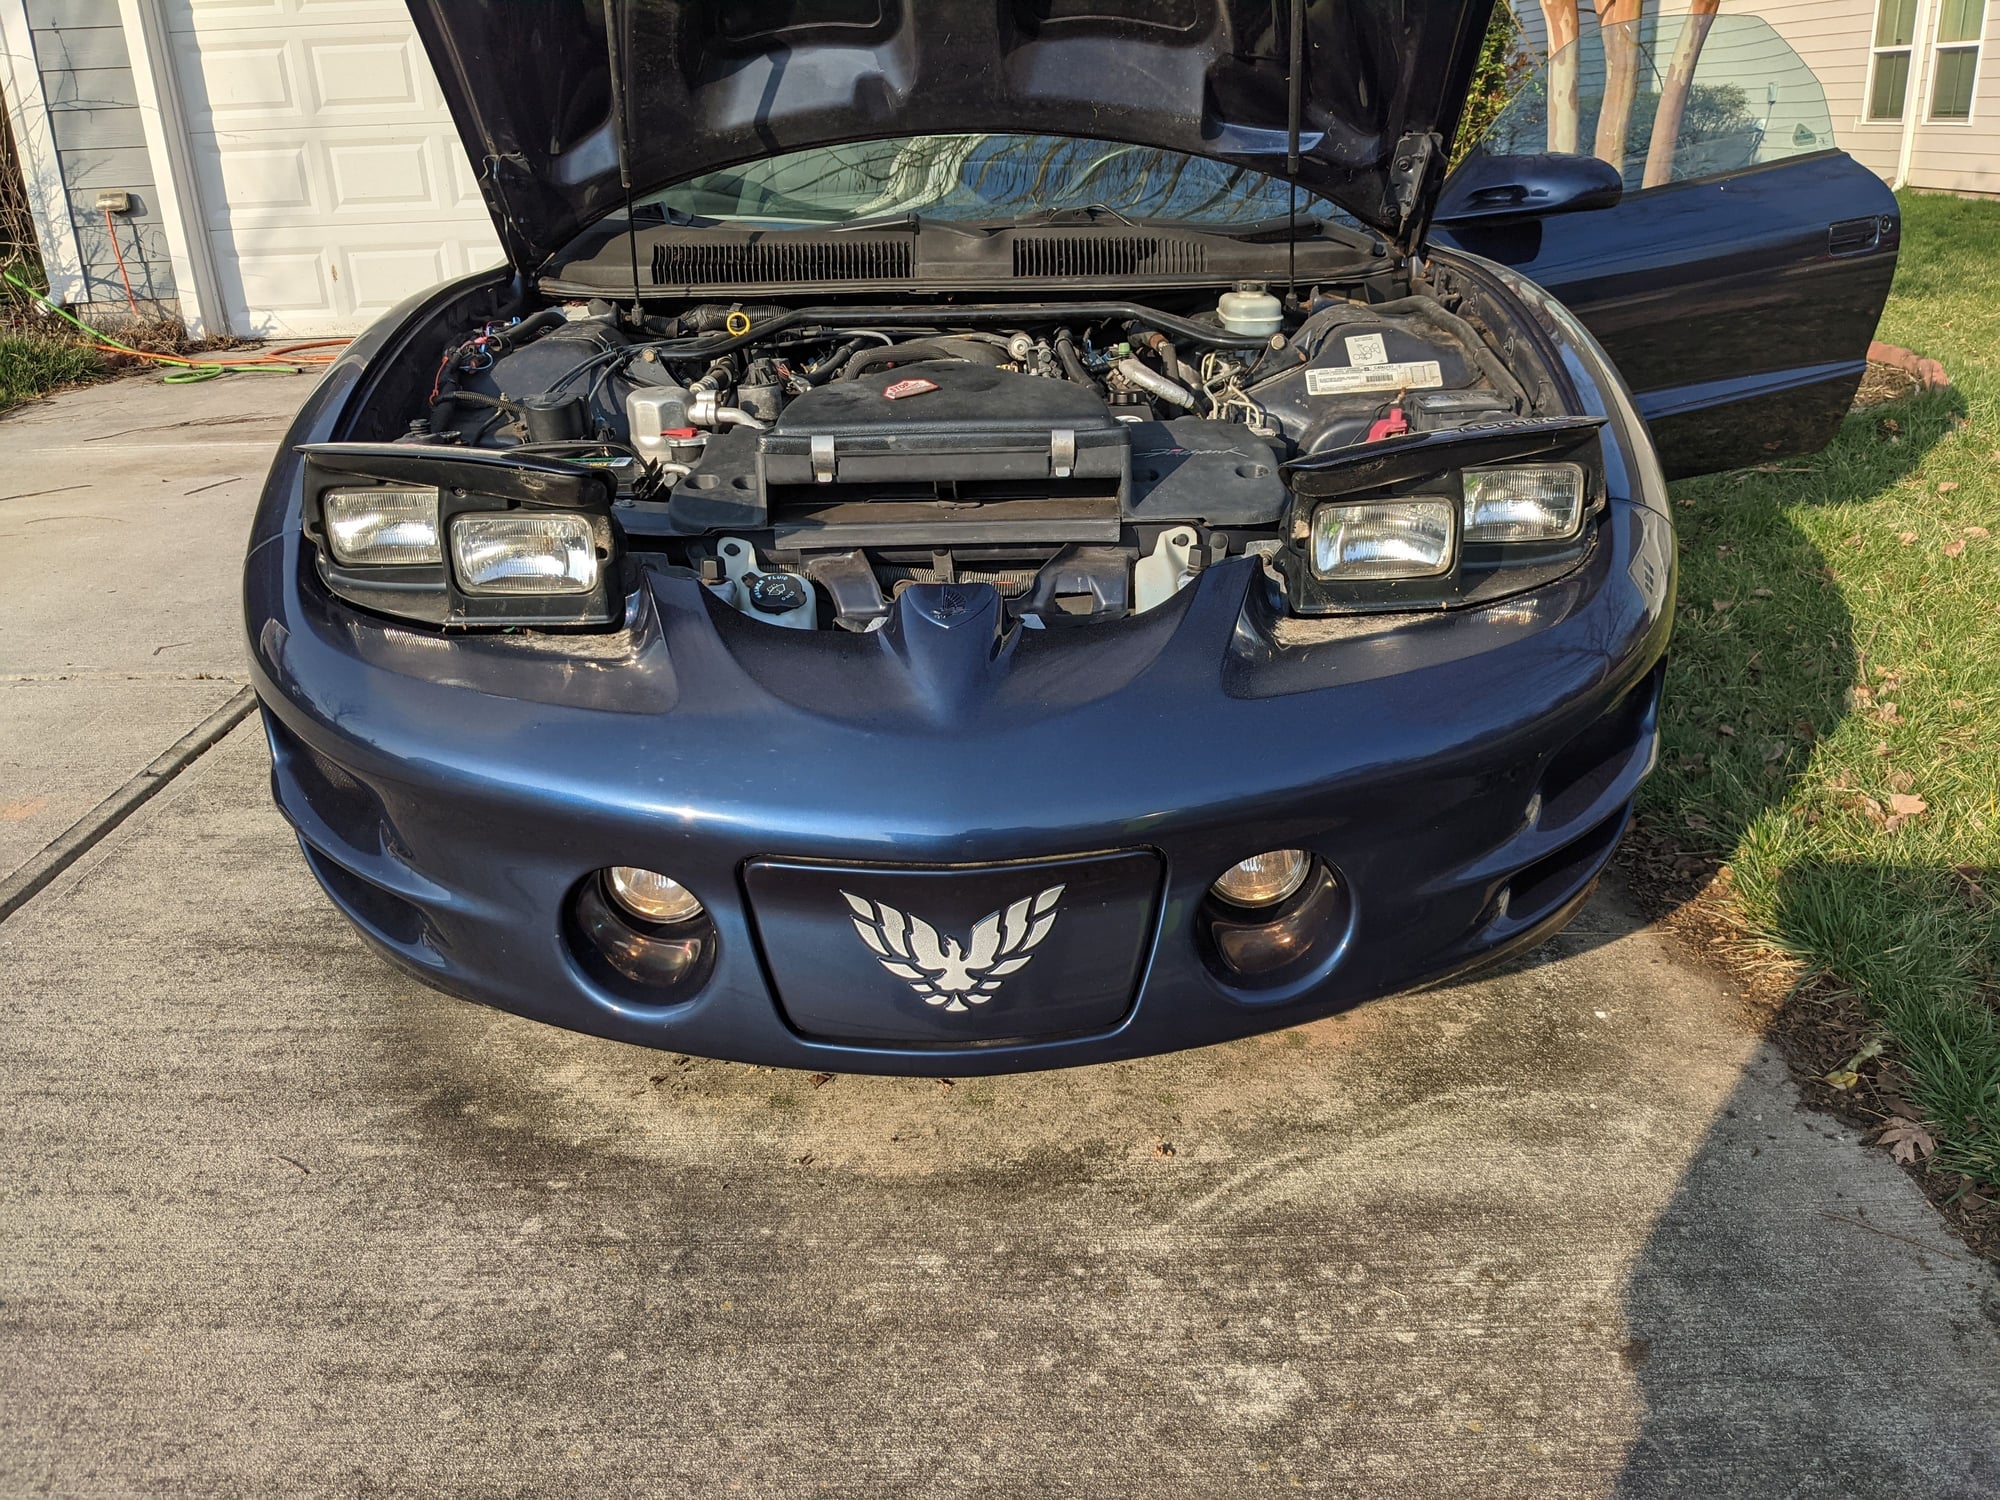 1999 Pontiac Firebird - Low mileage 1999 Pontiac Trans Am Firehawk M6 restoration project for sale - Used - VIN 2G2FV22G0X2212248 - 58,790 Miles - 8 cyl - 2WD - Manual - Coupe - Blue - Morrisville, NC 27560, United States